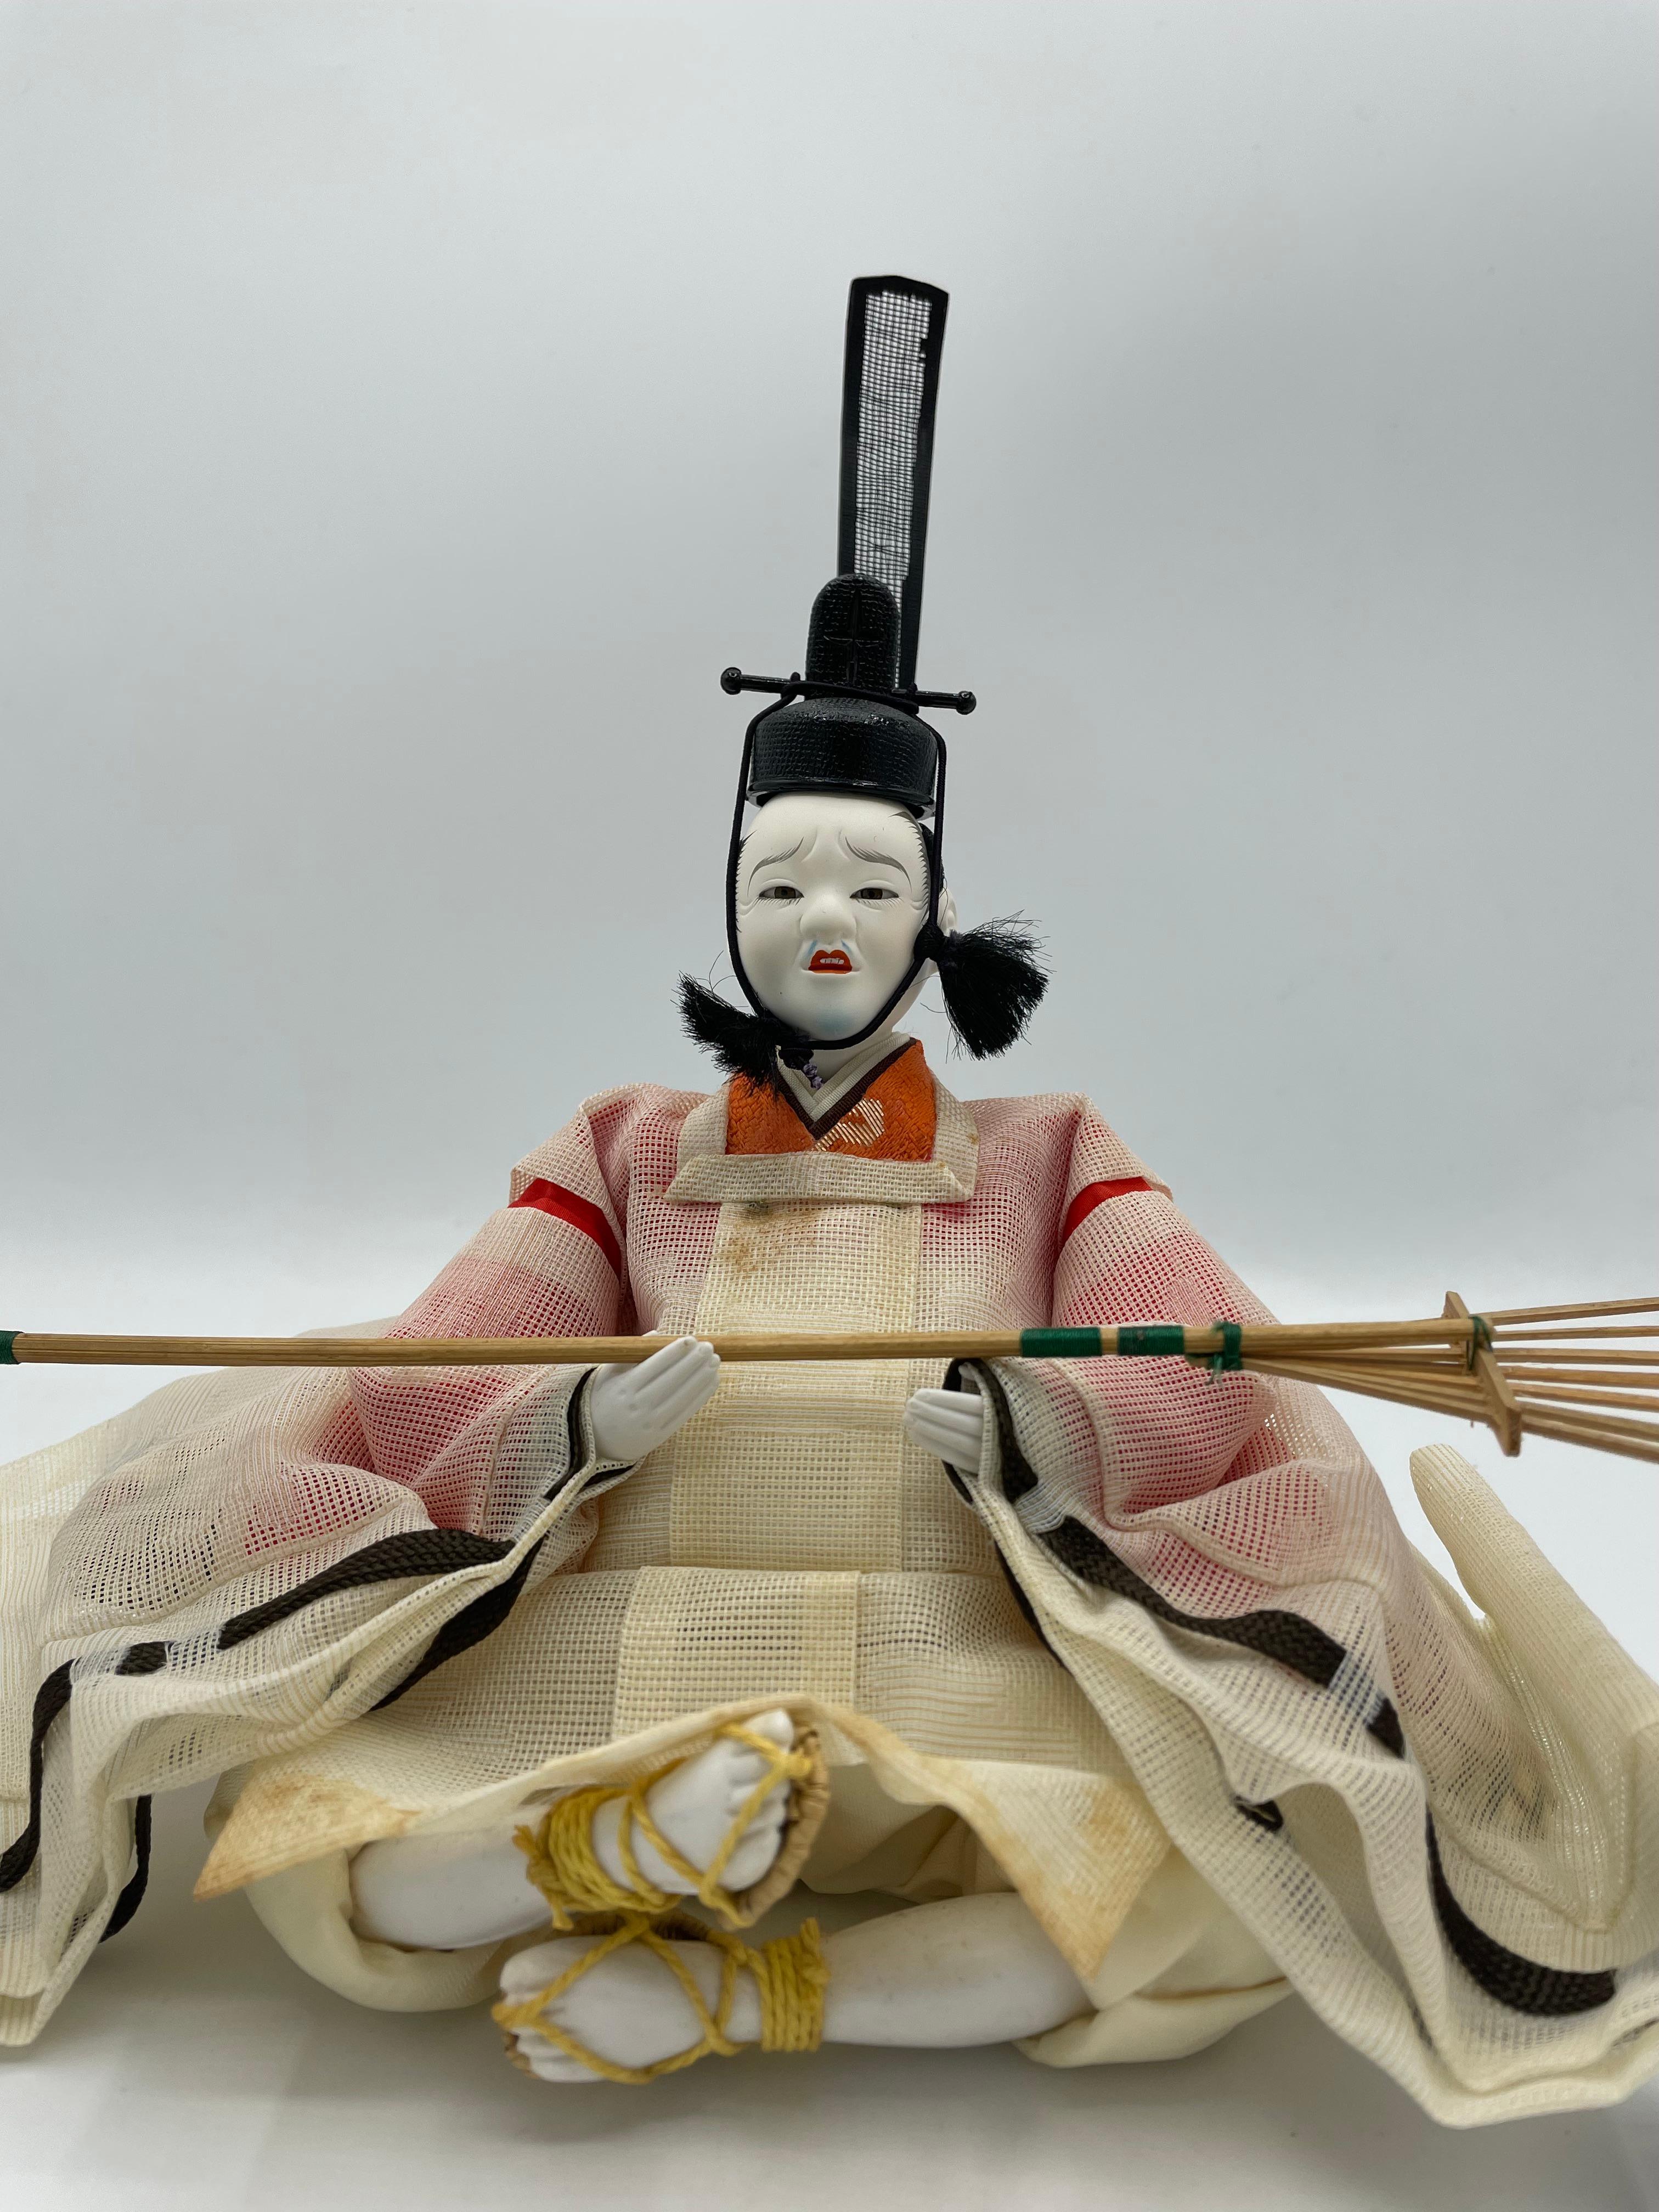 This is a doll which we use for Hinamatsuri day. This person is one of Shicho.
This person has a rake. He is called Shicho, Nakijyogo. 
This doll was made with plastic, cotton, bambou and silk. This doll was made around 1980s in Showa era.
This doll